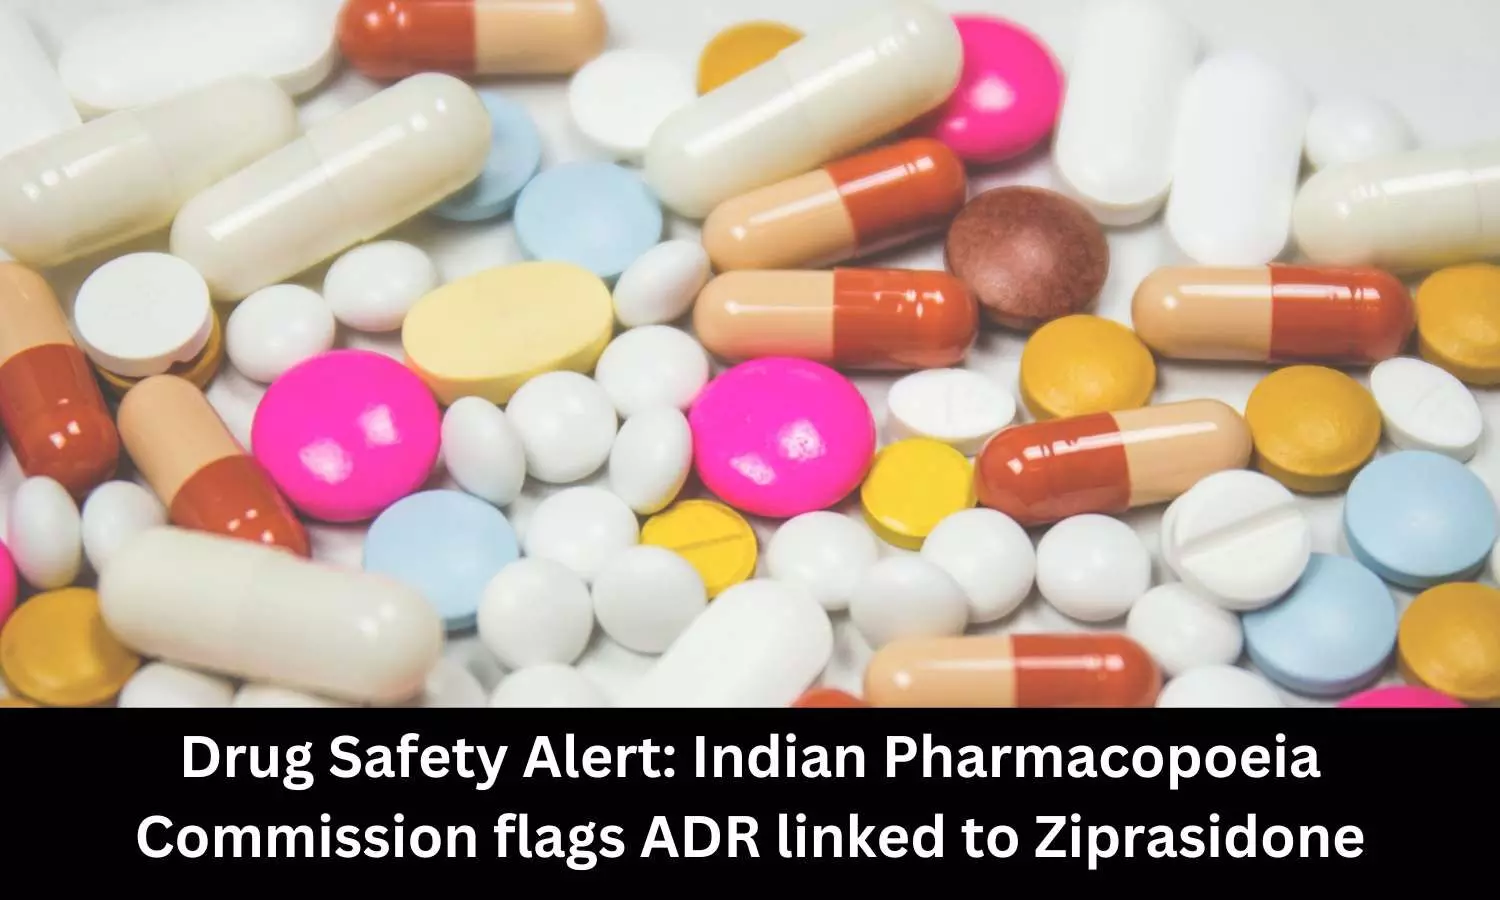 Ziprasidone may lead to Drug Reaction with Eosinophilia and Systemic Symptoms, reveals IPC drug safety alert